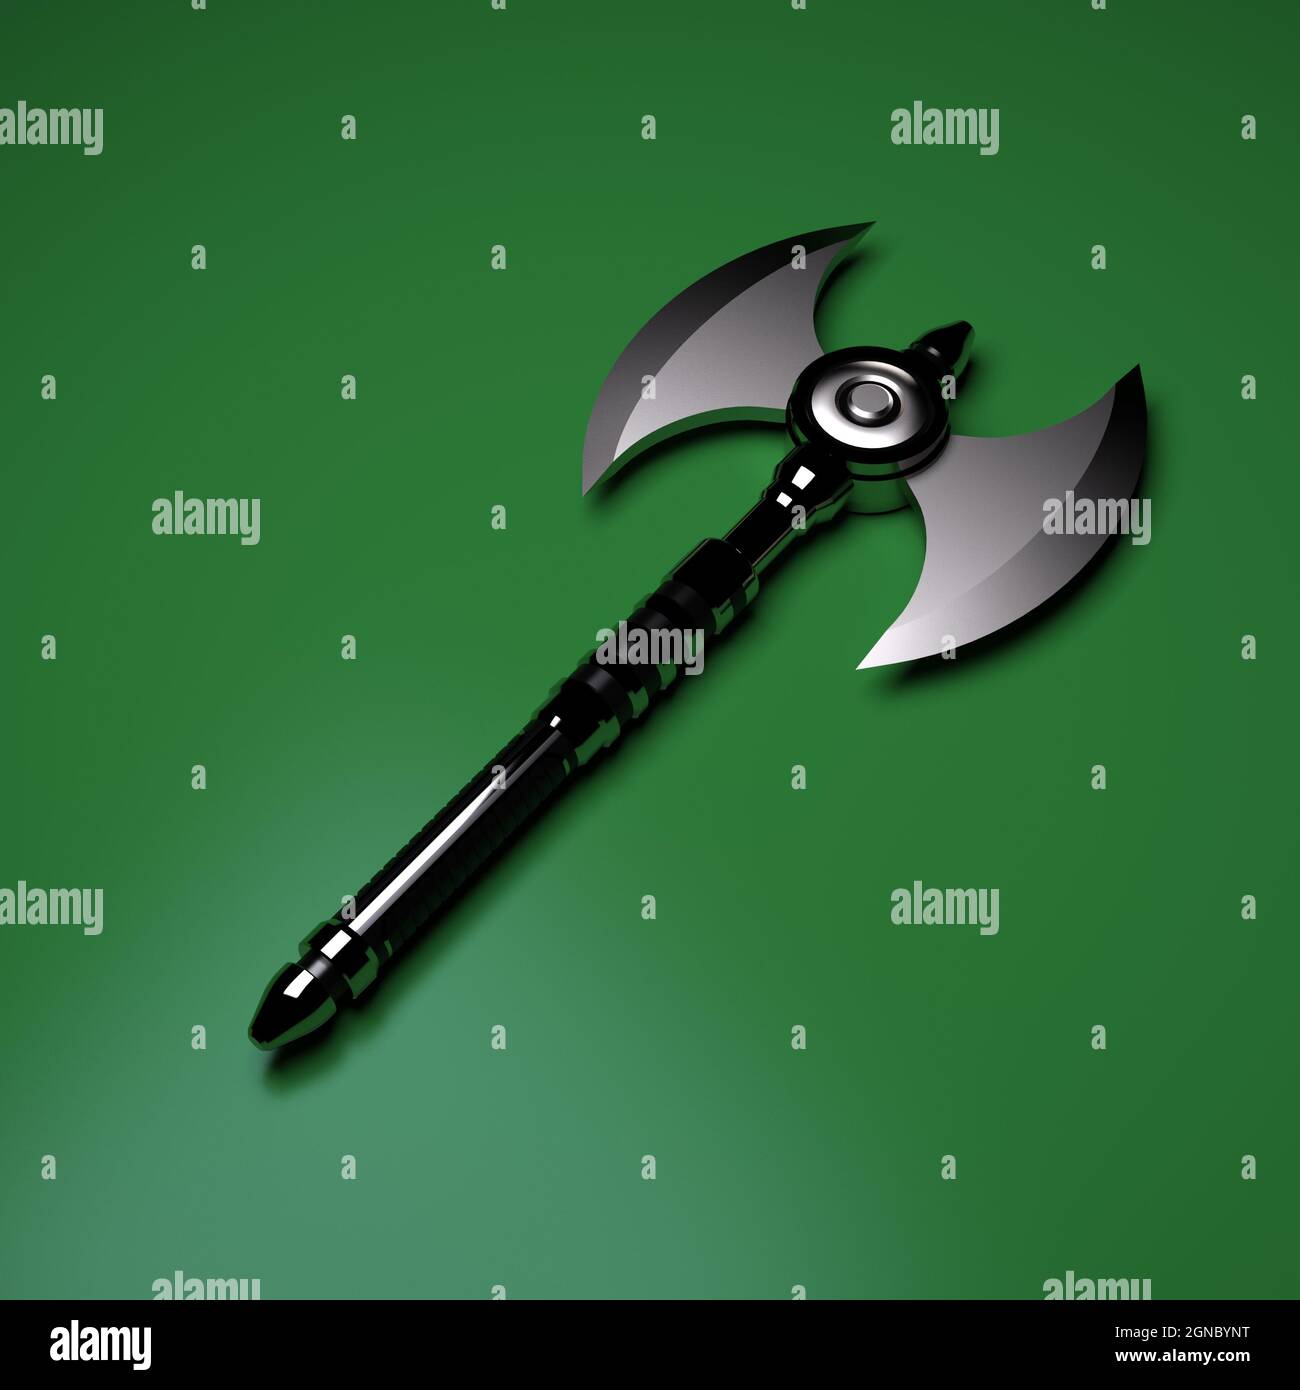 3d-illustration of a fantasy axe weapon Stock Photo